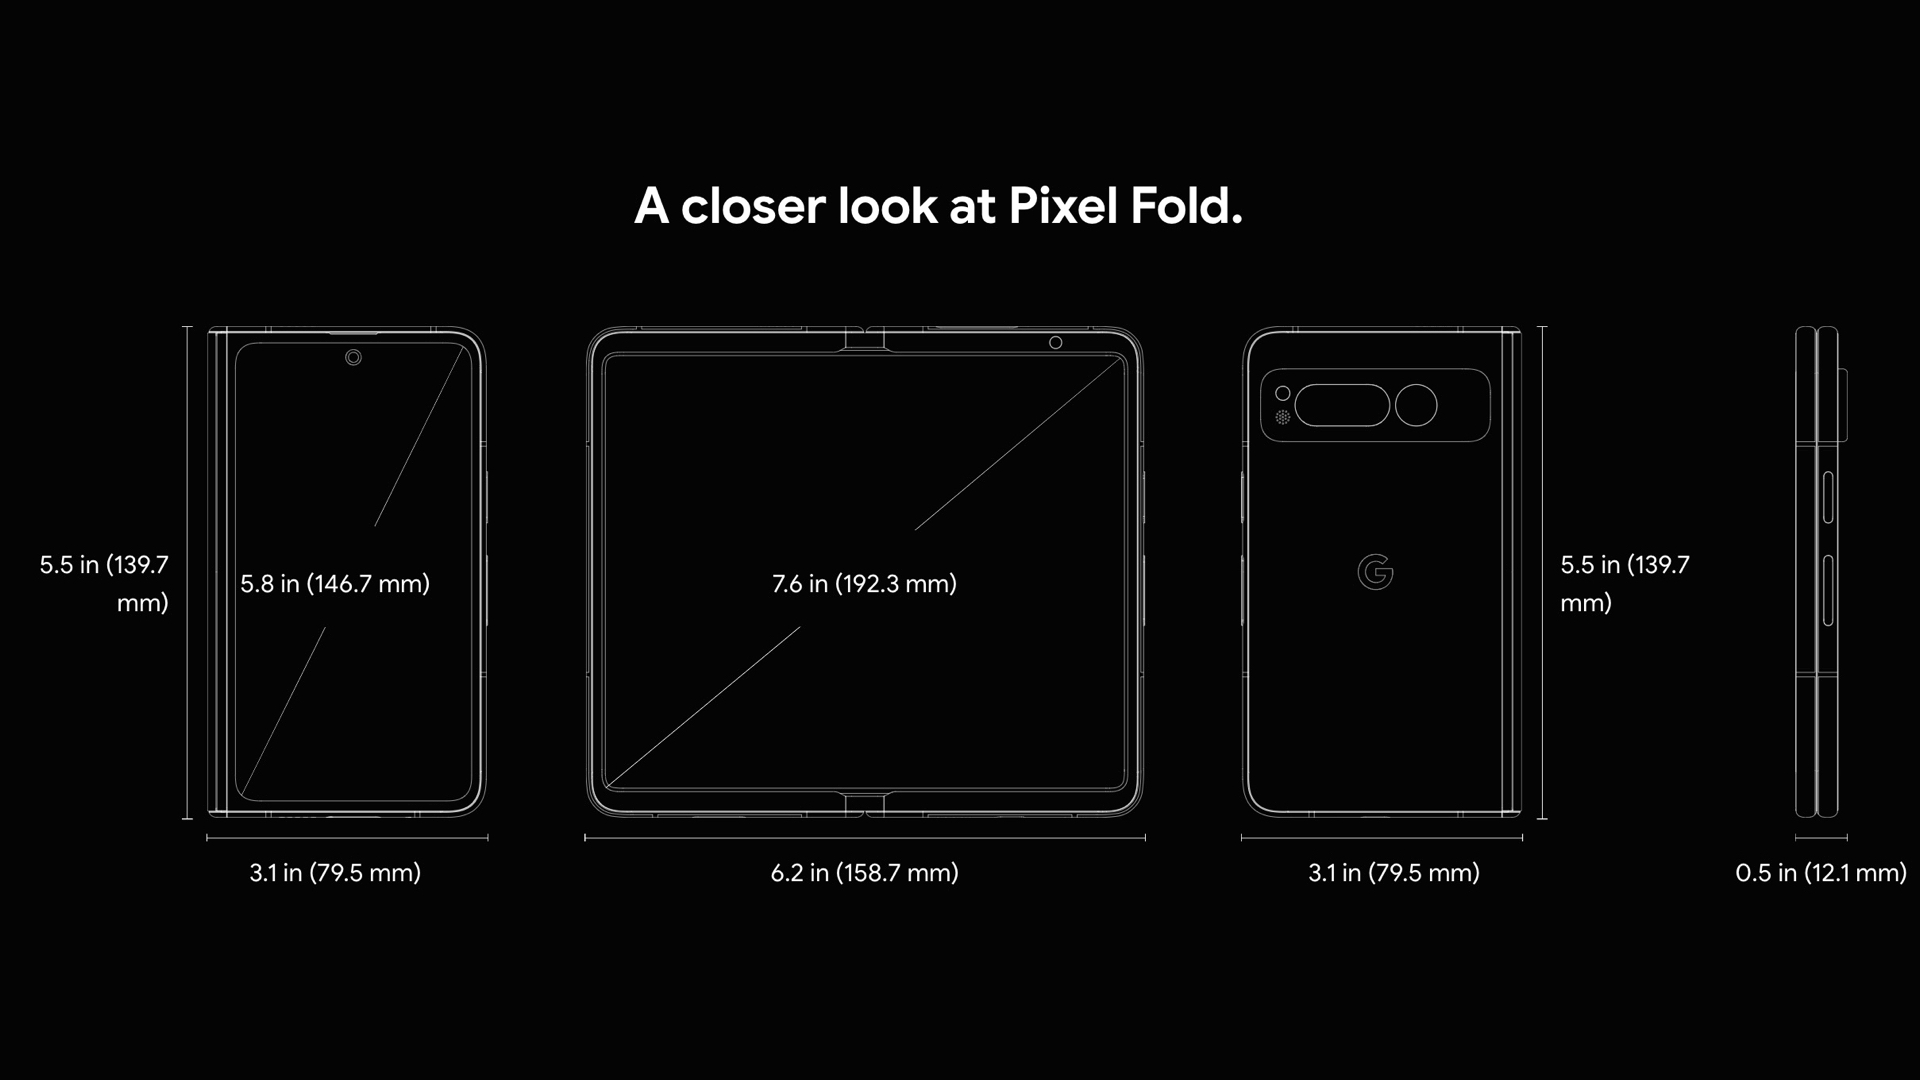 Pixel Fold specs and dimensions.